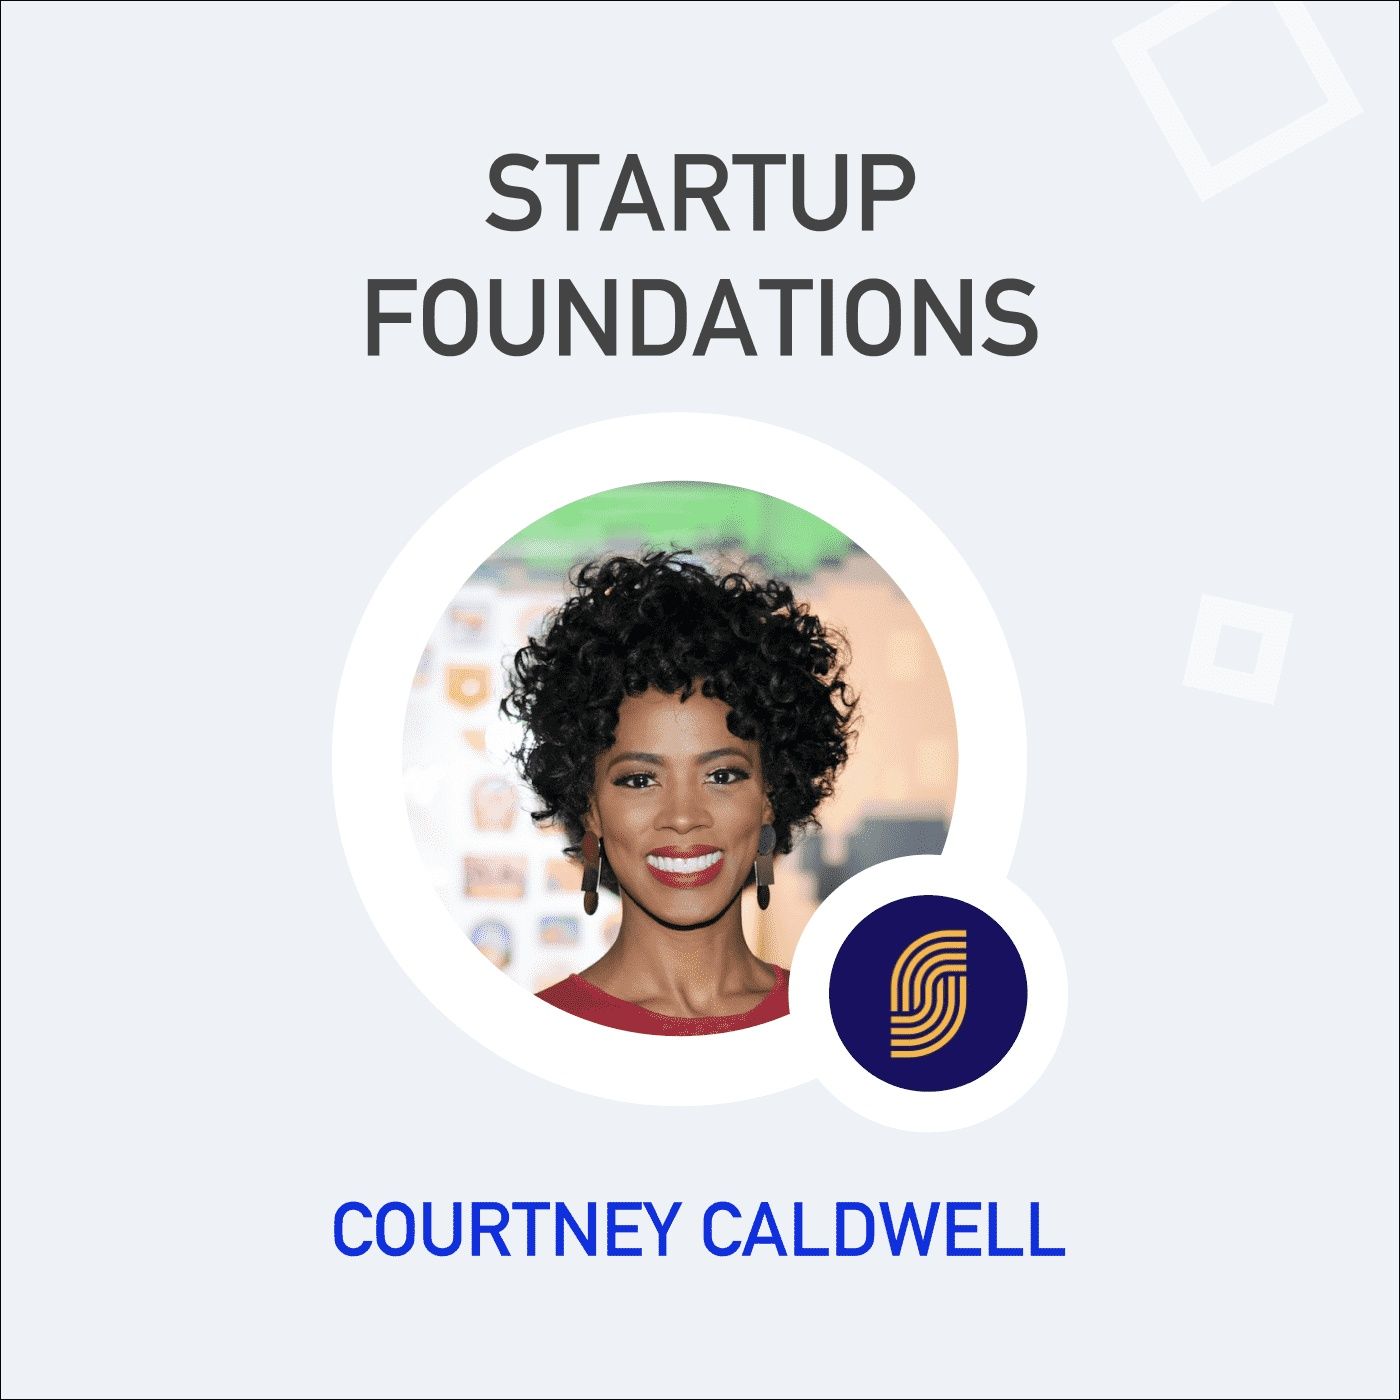 Courtney Caldwell: Revolutionizing revenue generation for beauty industry